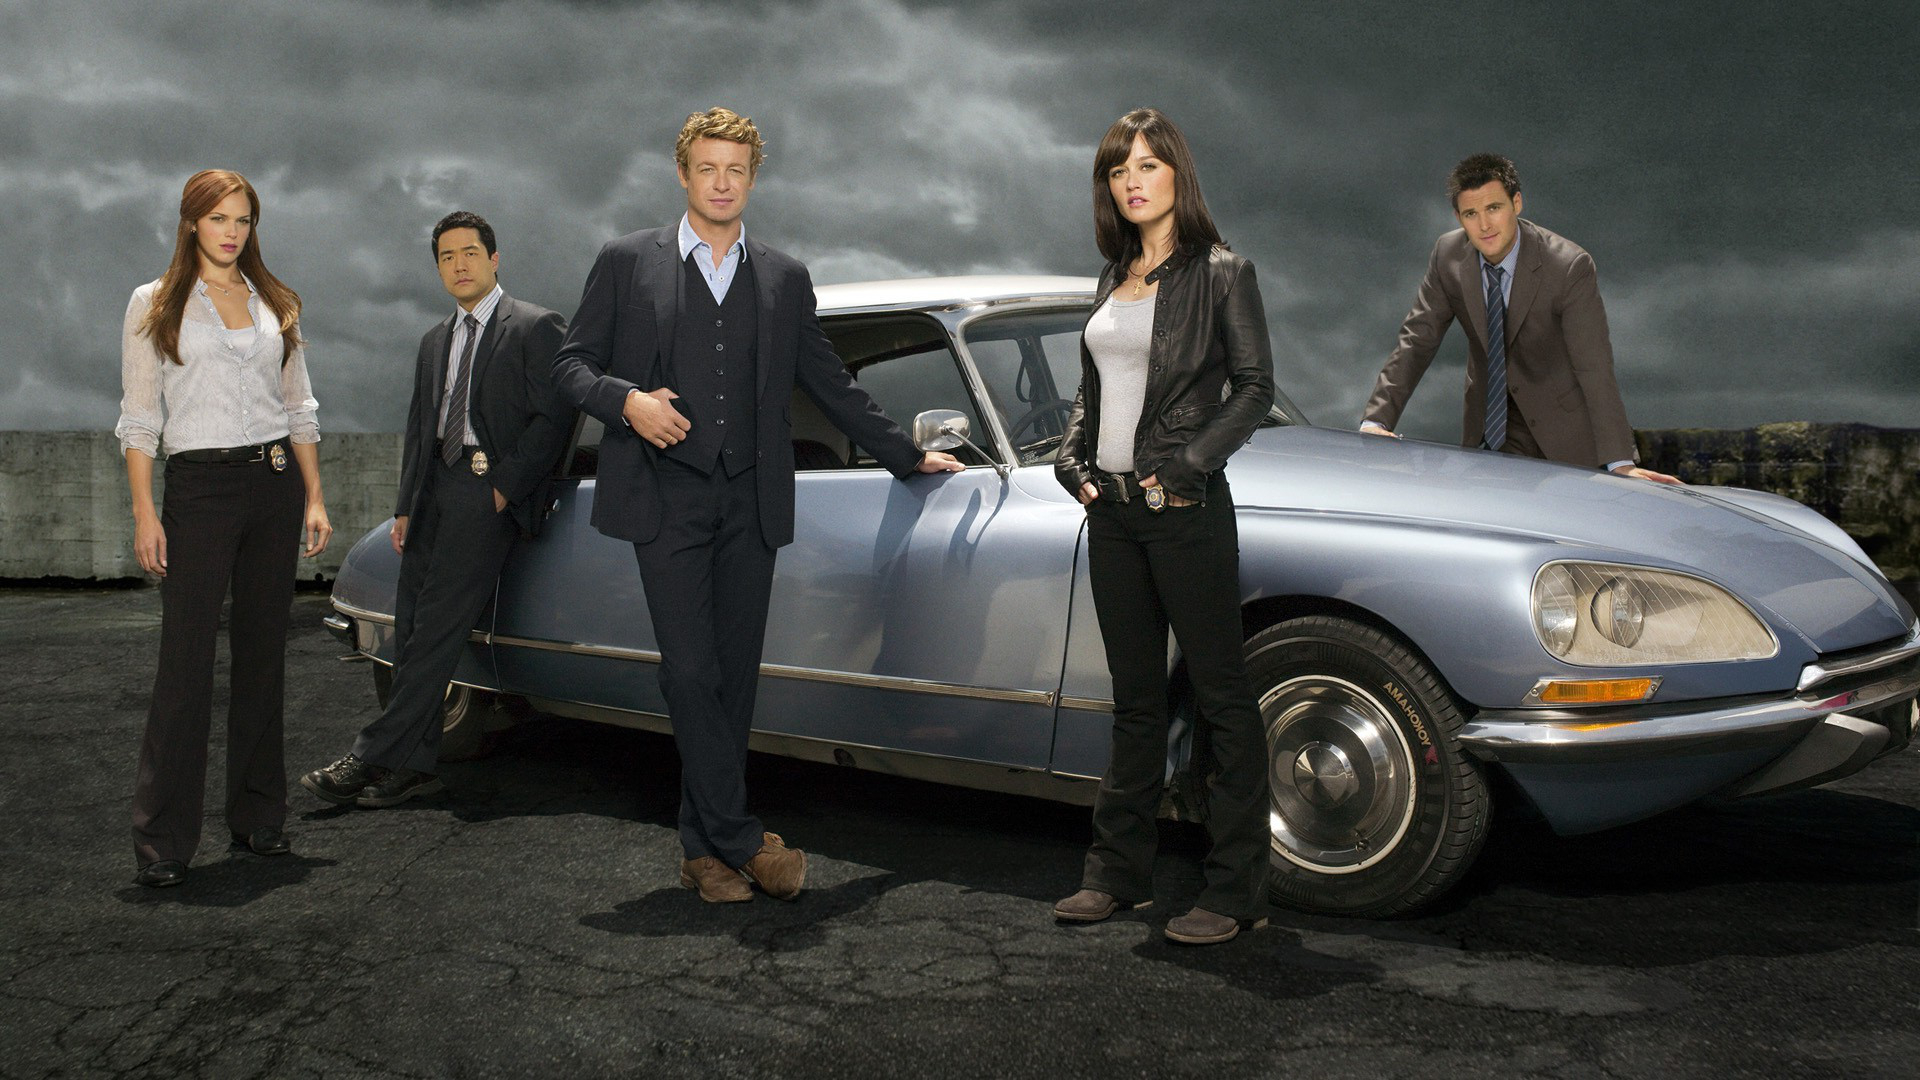 The Mentalist Wallpaper High Definition Quality